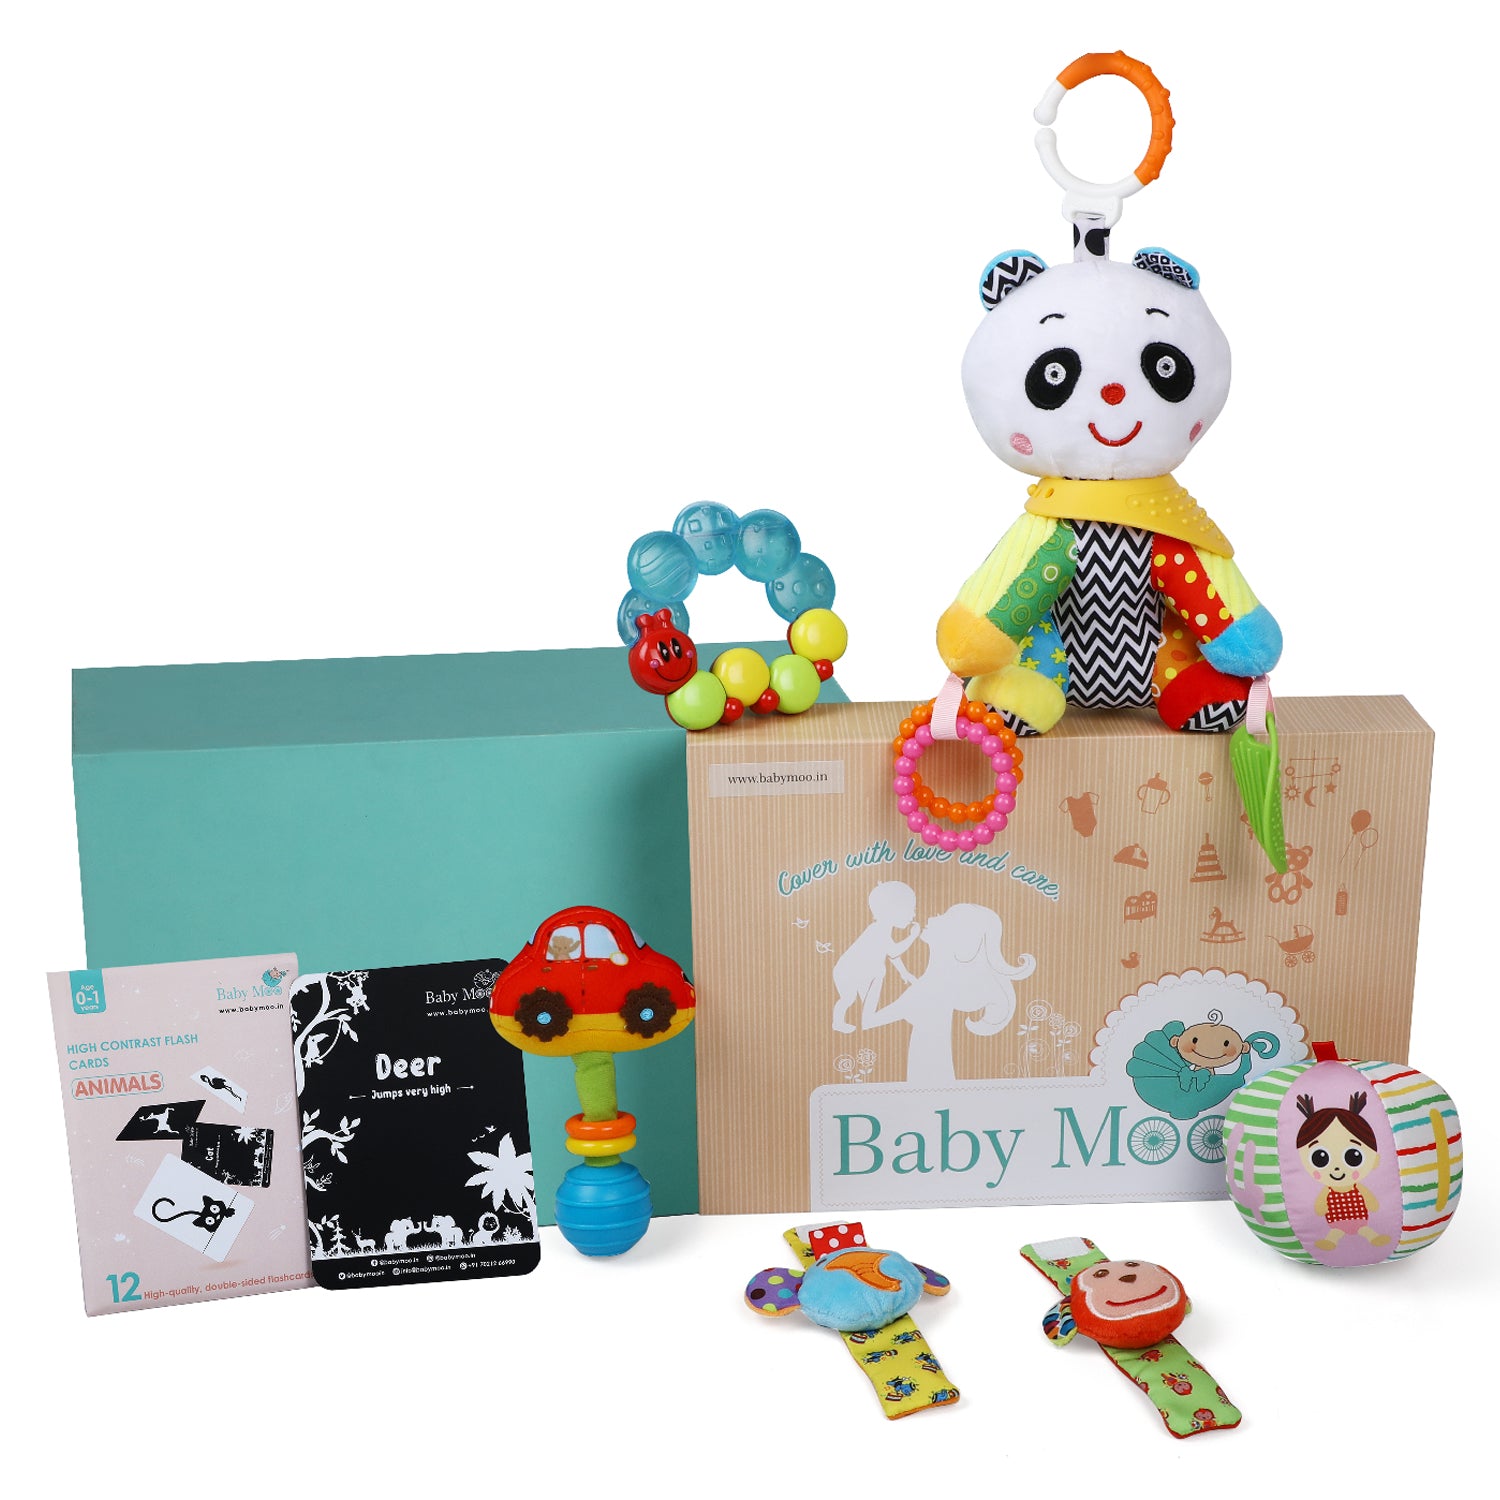 Newborn Play Kit With High Contrast Cards, Toy Rattles And Teethers 6 Items 0-12M - Multicolour